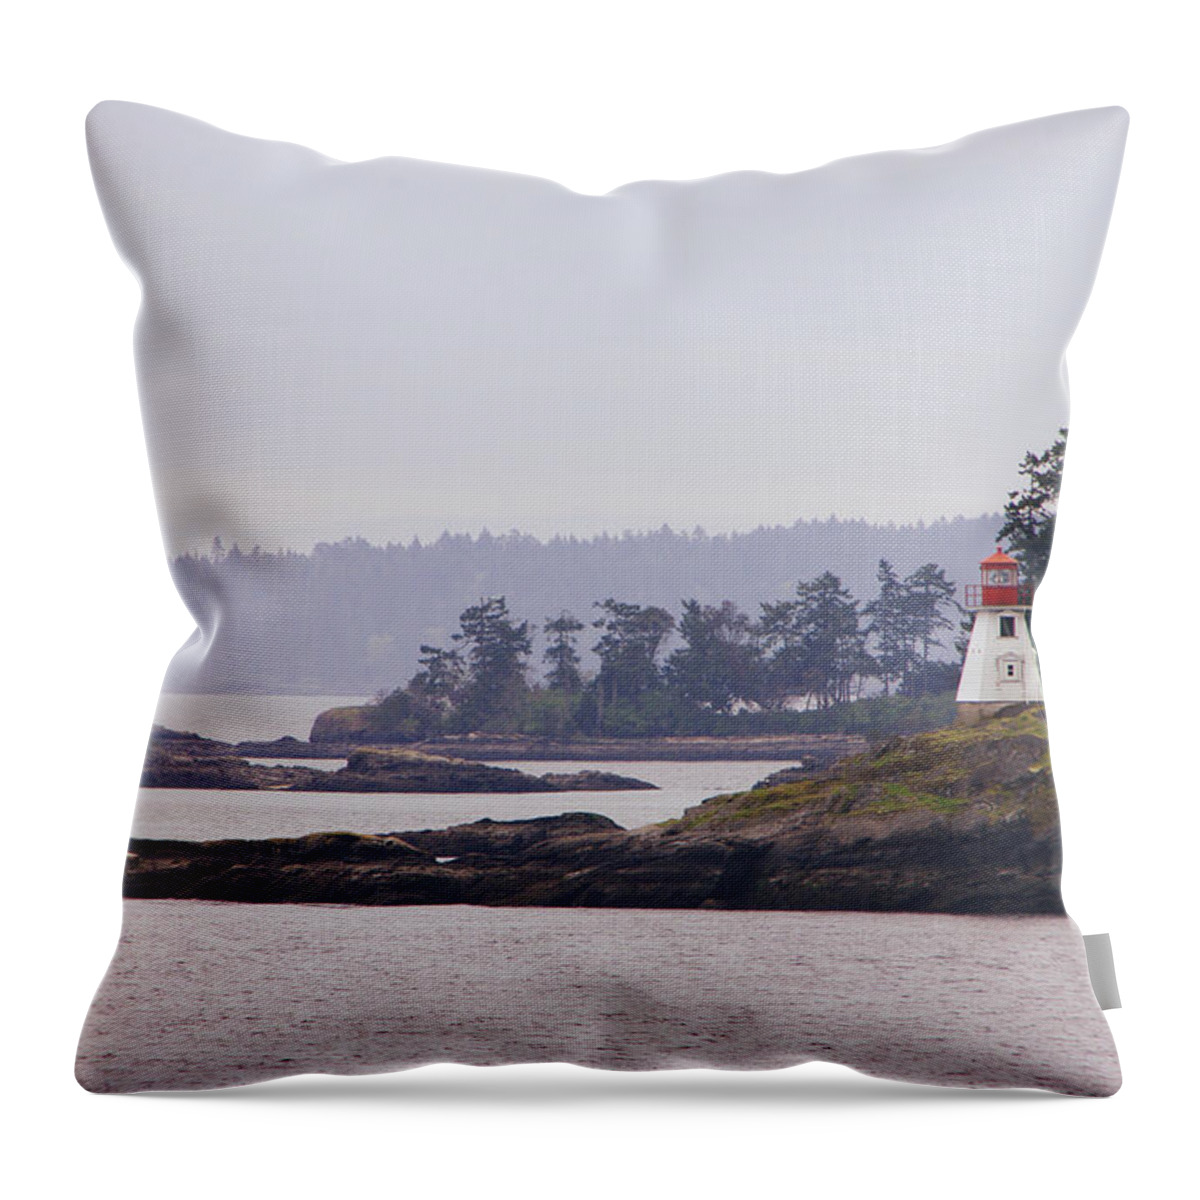 Lighthouse Throw Pillow featuring the photograph Island Lighthouse by Marilyn Wilson